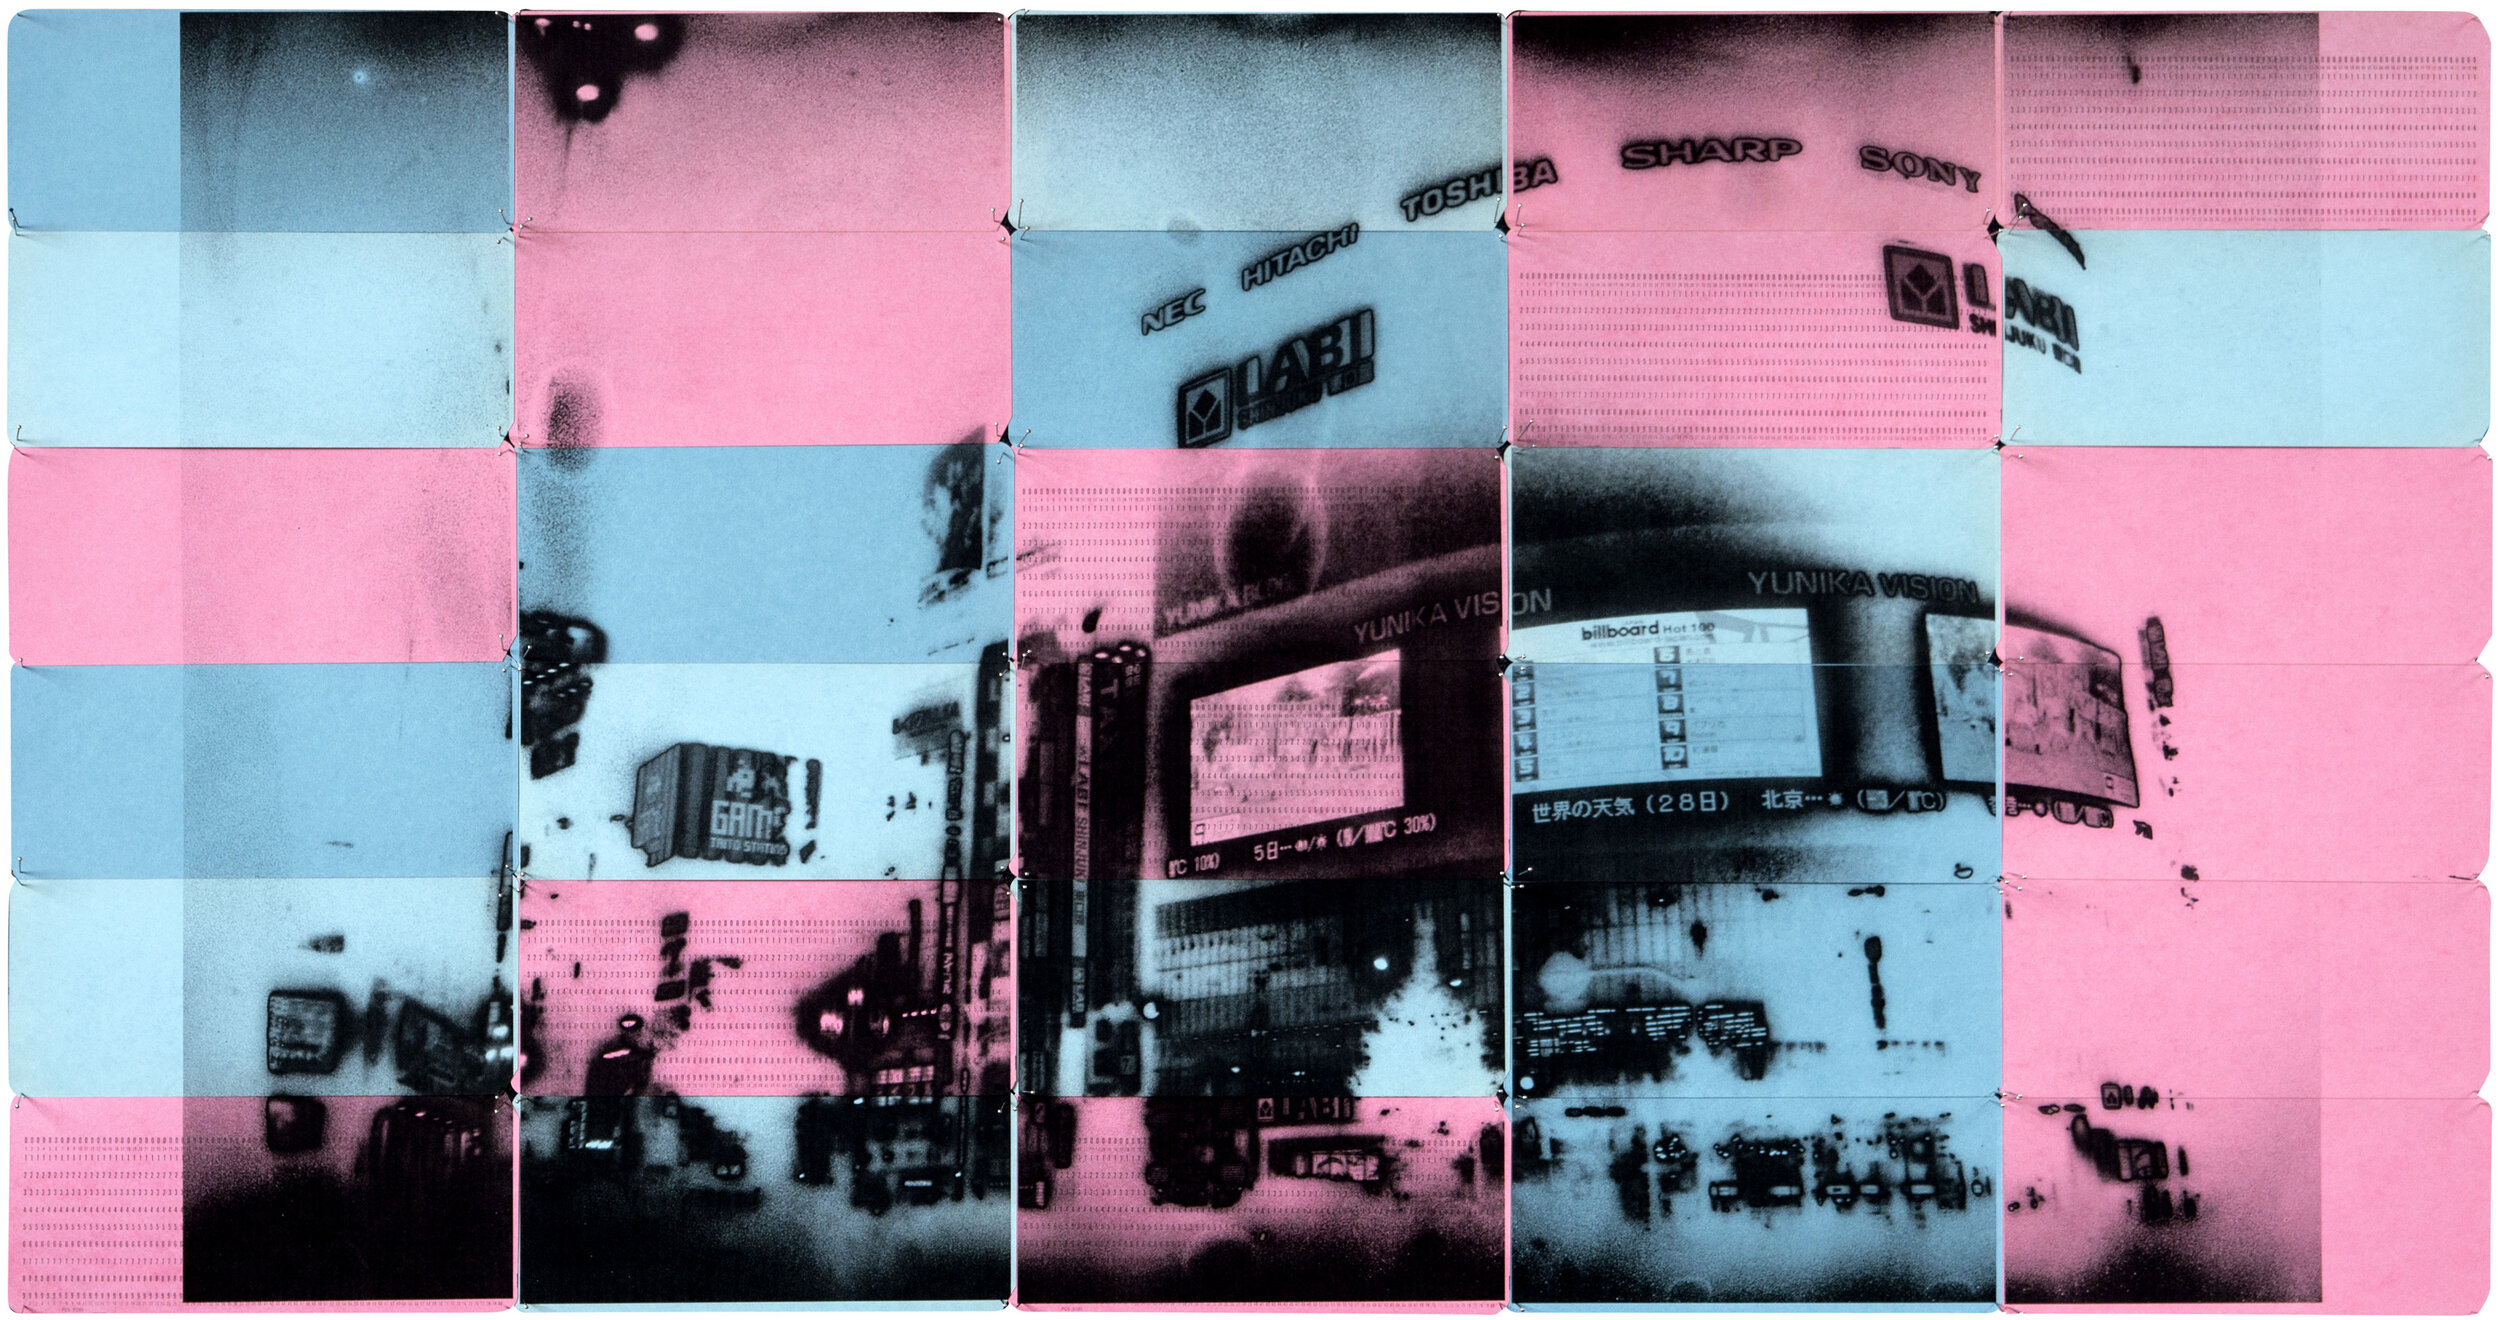 TYO4_057 2021 Inkjet on 30 blue and pink computer punch cards Negative date 2019 49.8 x 93.5cm.jpg